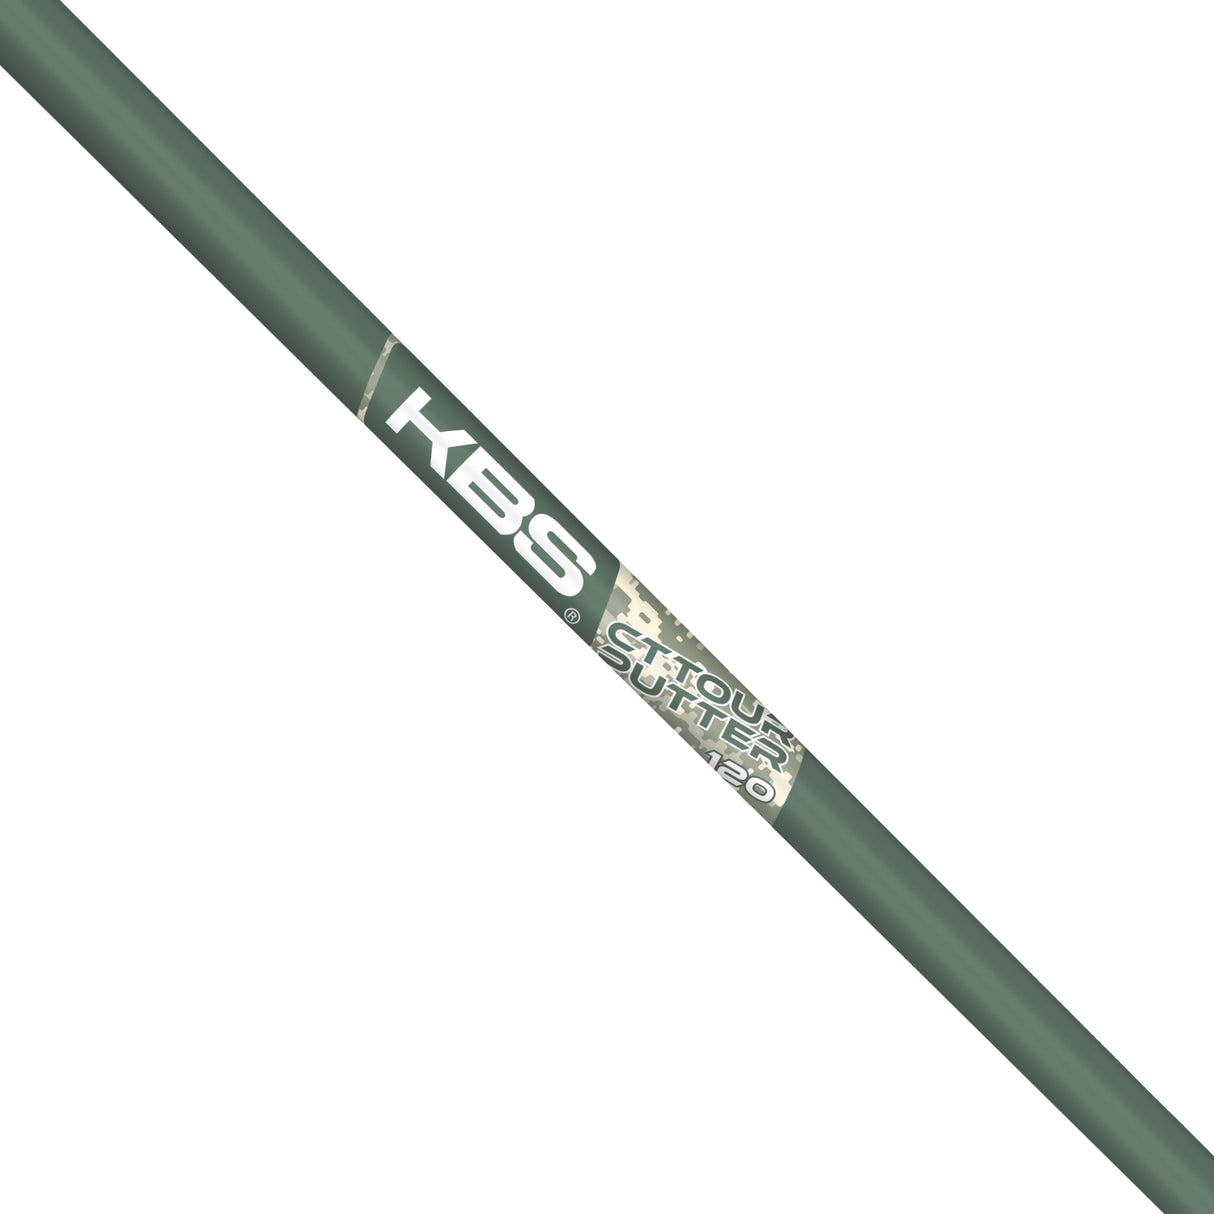 KBS CT Tour Putter Shaft - STRAIGHT (Military Green)